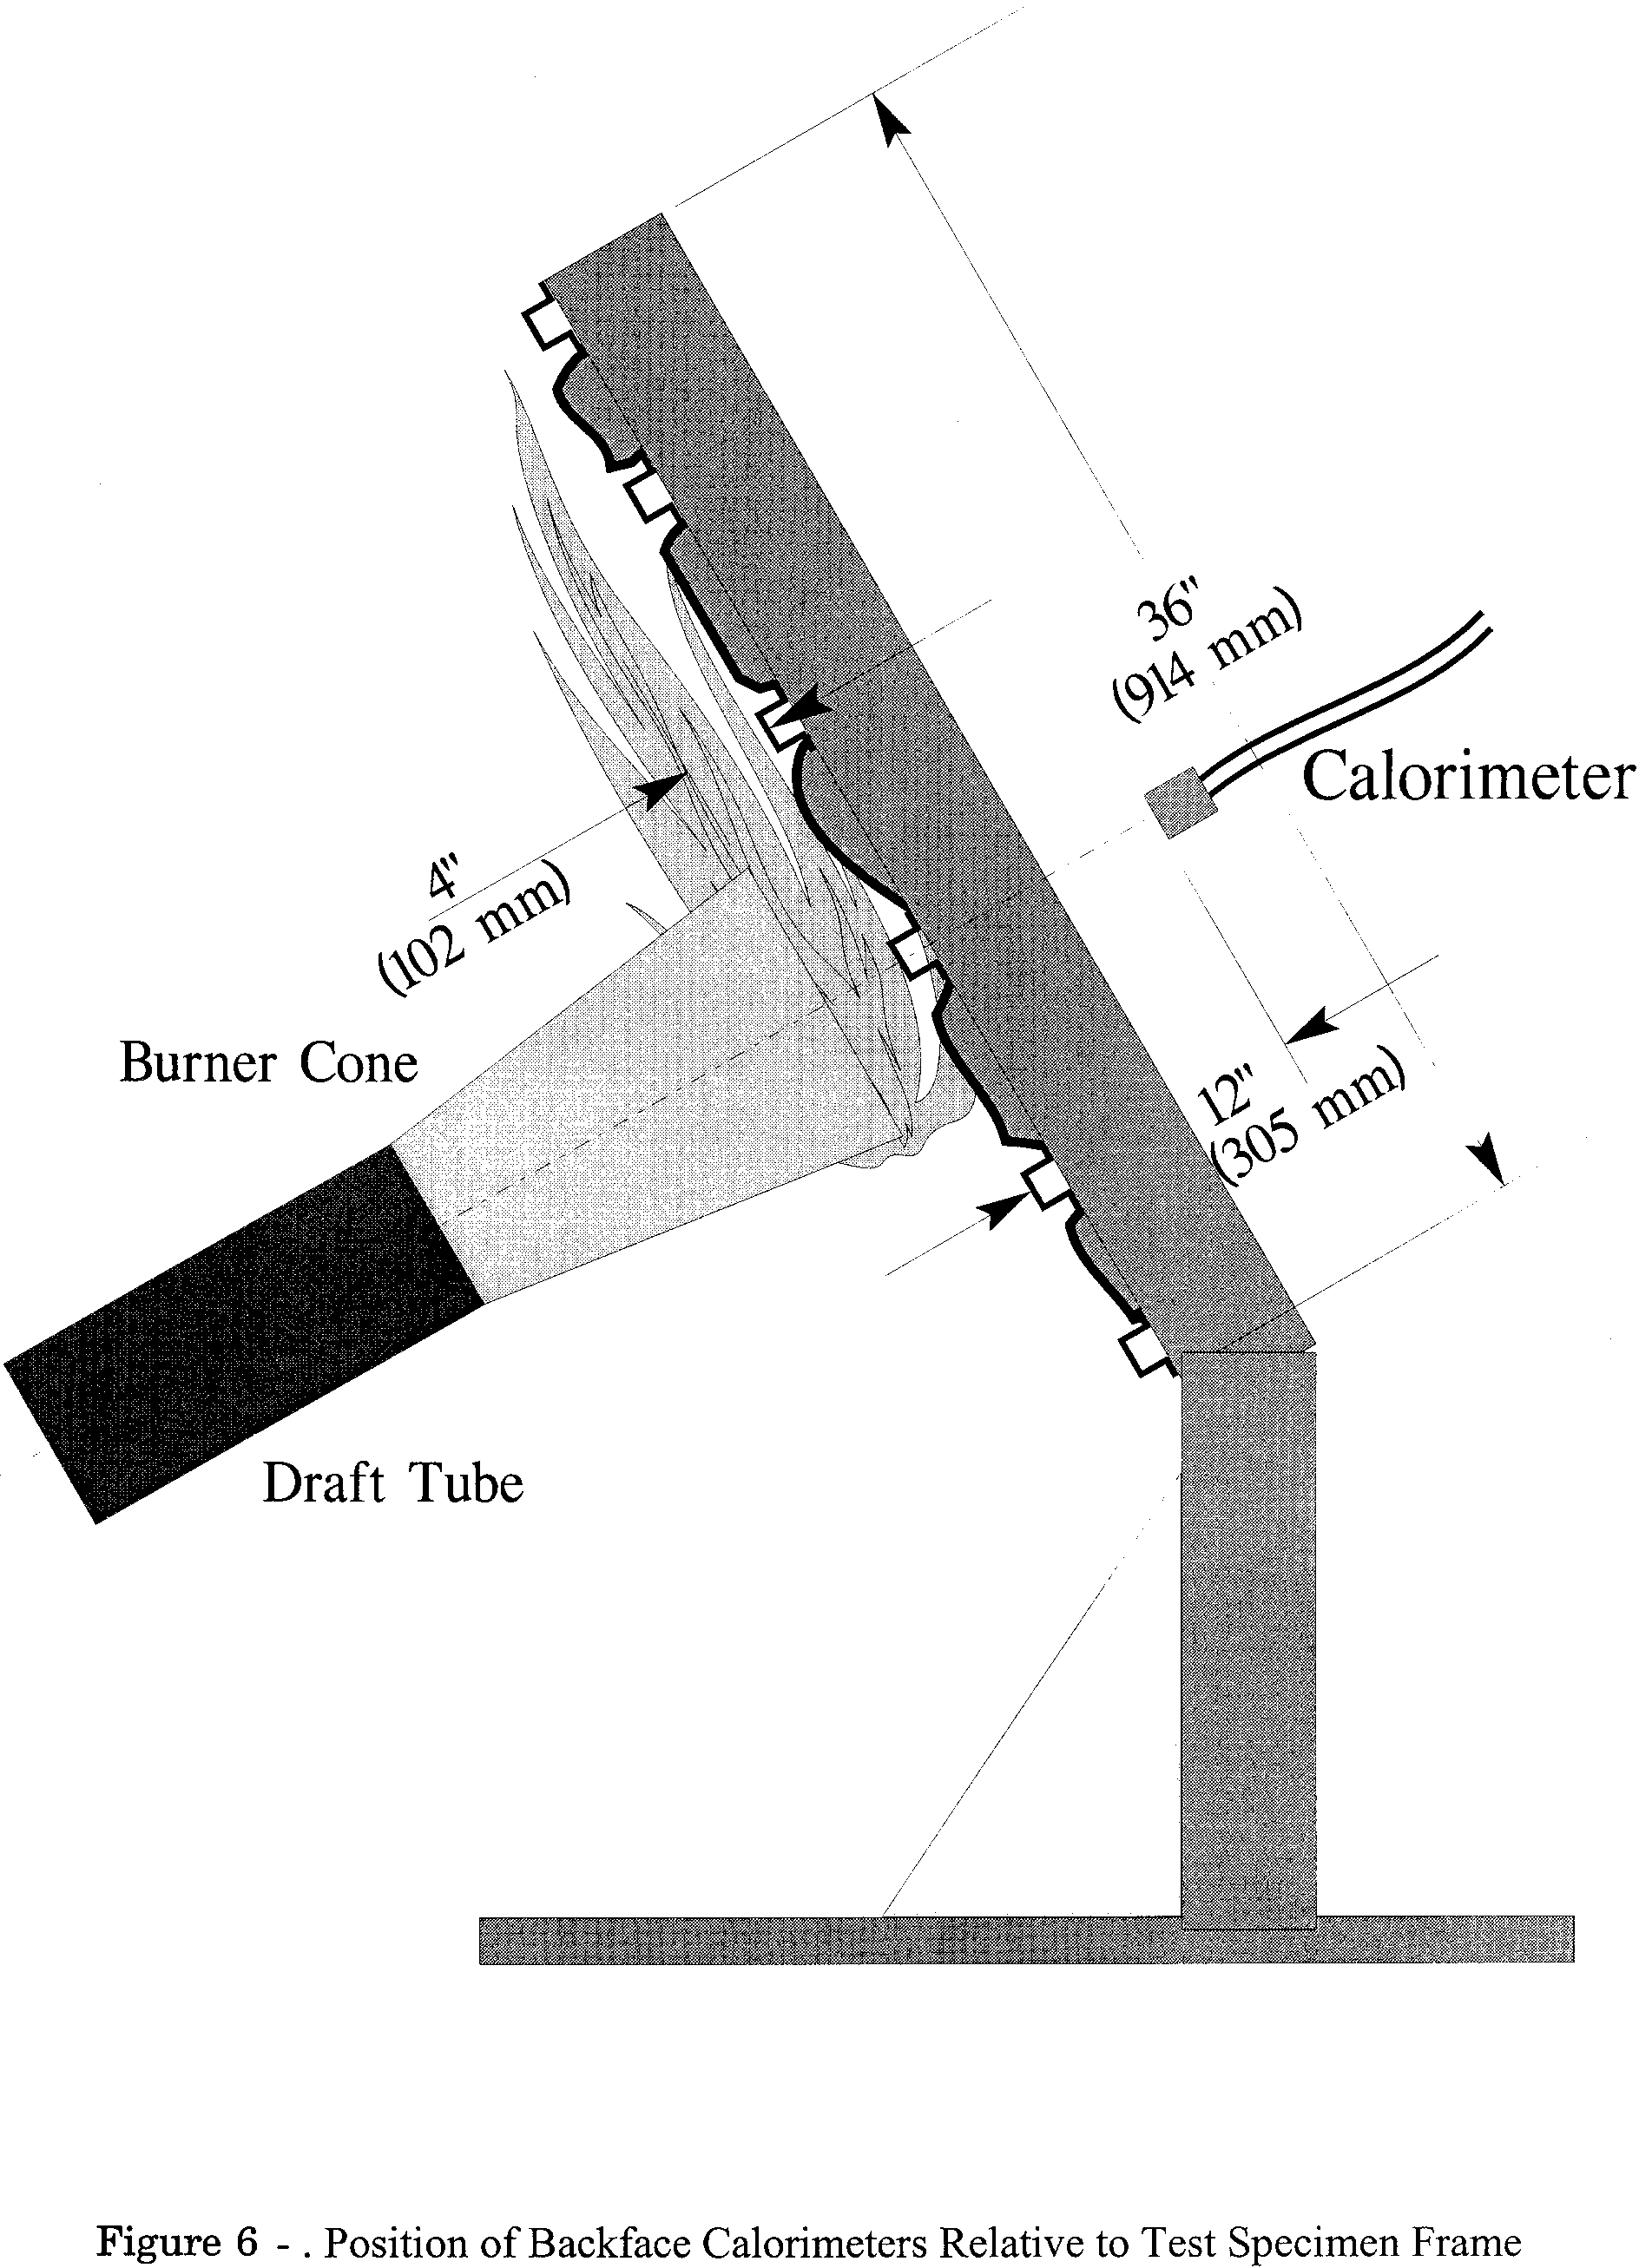 Graphic of (5) Backface calorimeters. Mount two total heat flux Gardon type calorimeters behind the insulation test specimens on the back side (cold) area of the test specimen mounting frame as shown in figure 6. Position the calorimeters along the same plane as the burner cone centerline, at a distance of 4 inches (102 mm) from the vertical centerline of the test frame.